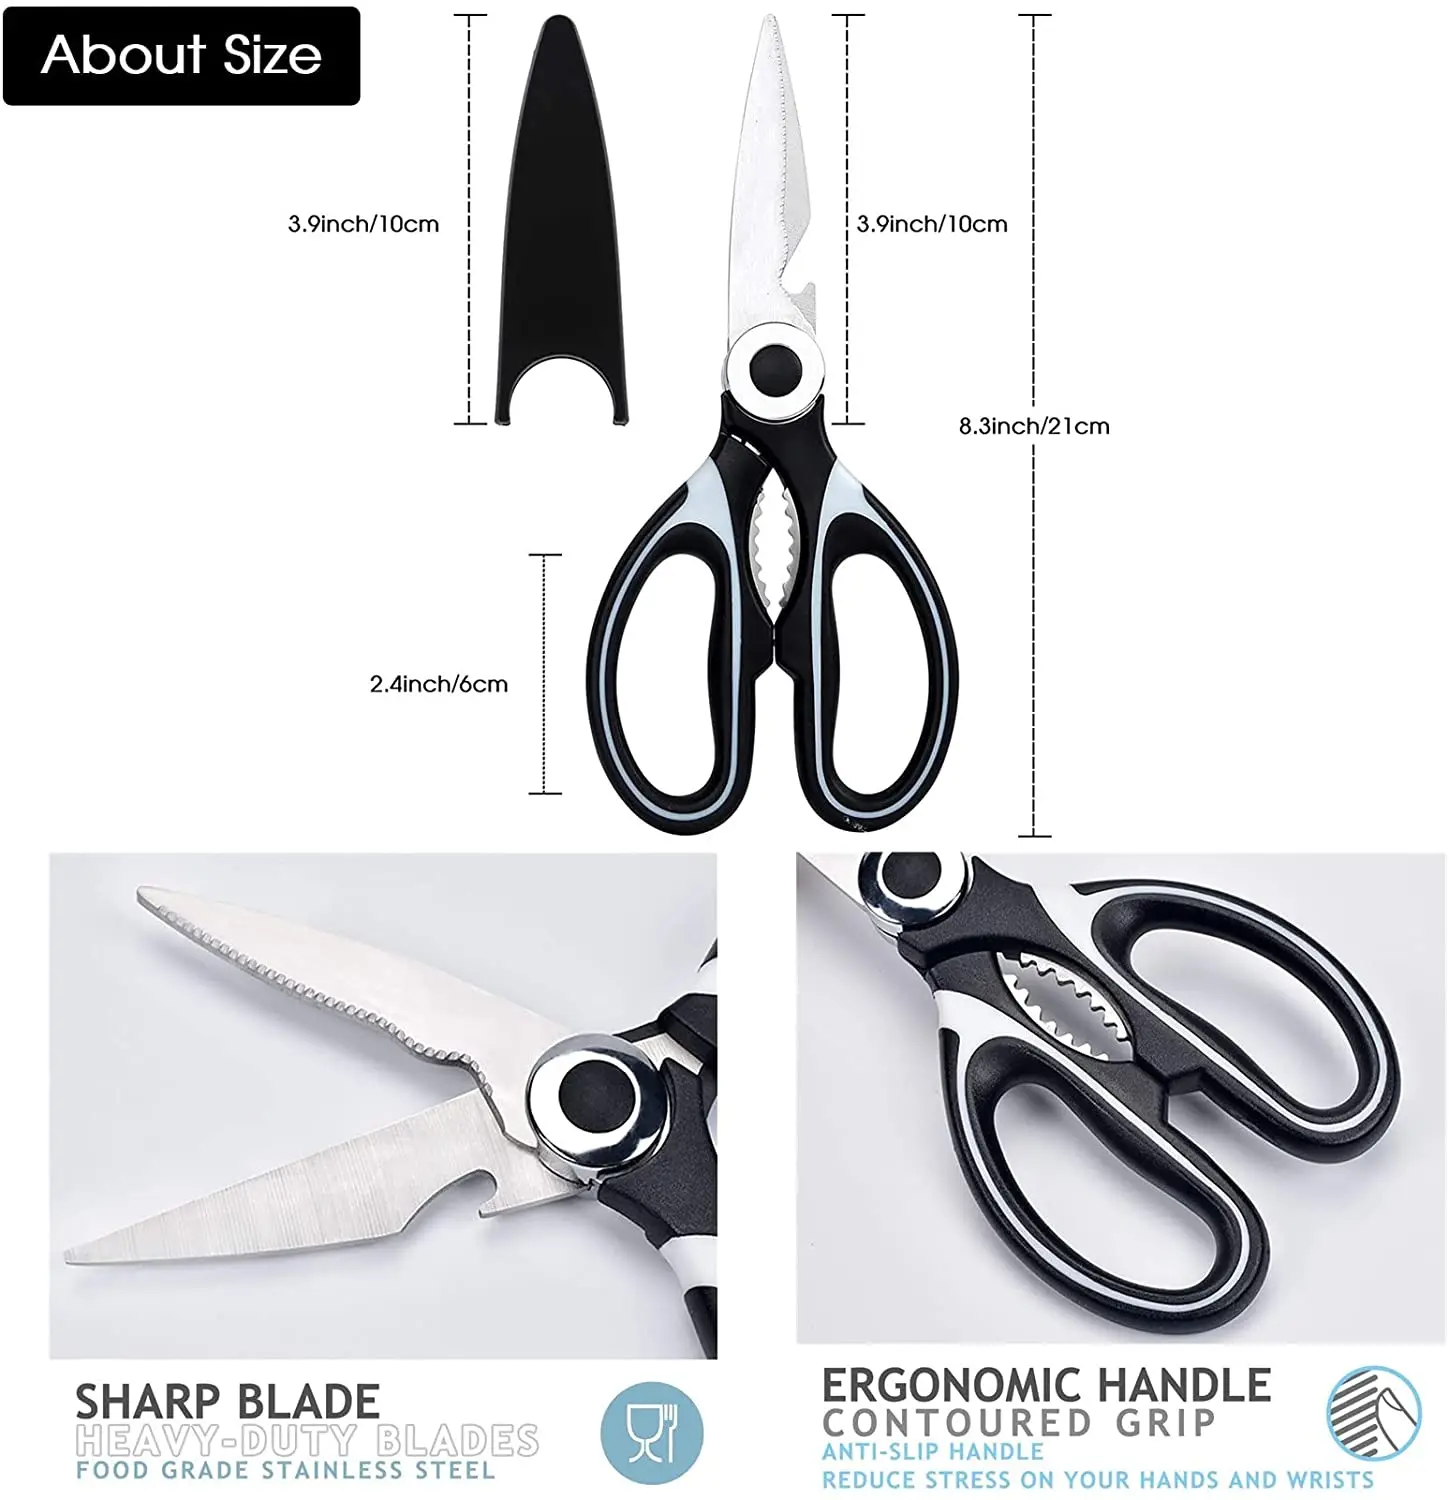 Global Stainless Steel Kitchen Shears 21cm - Cookin